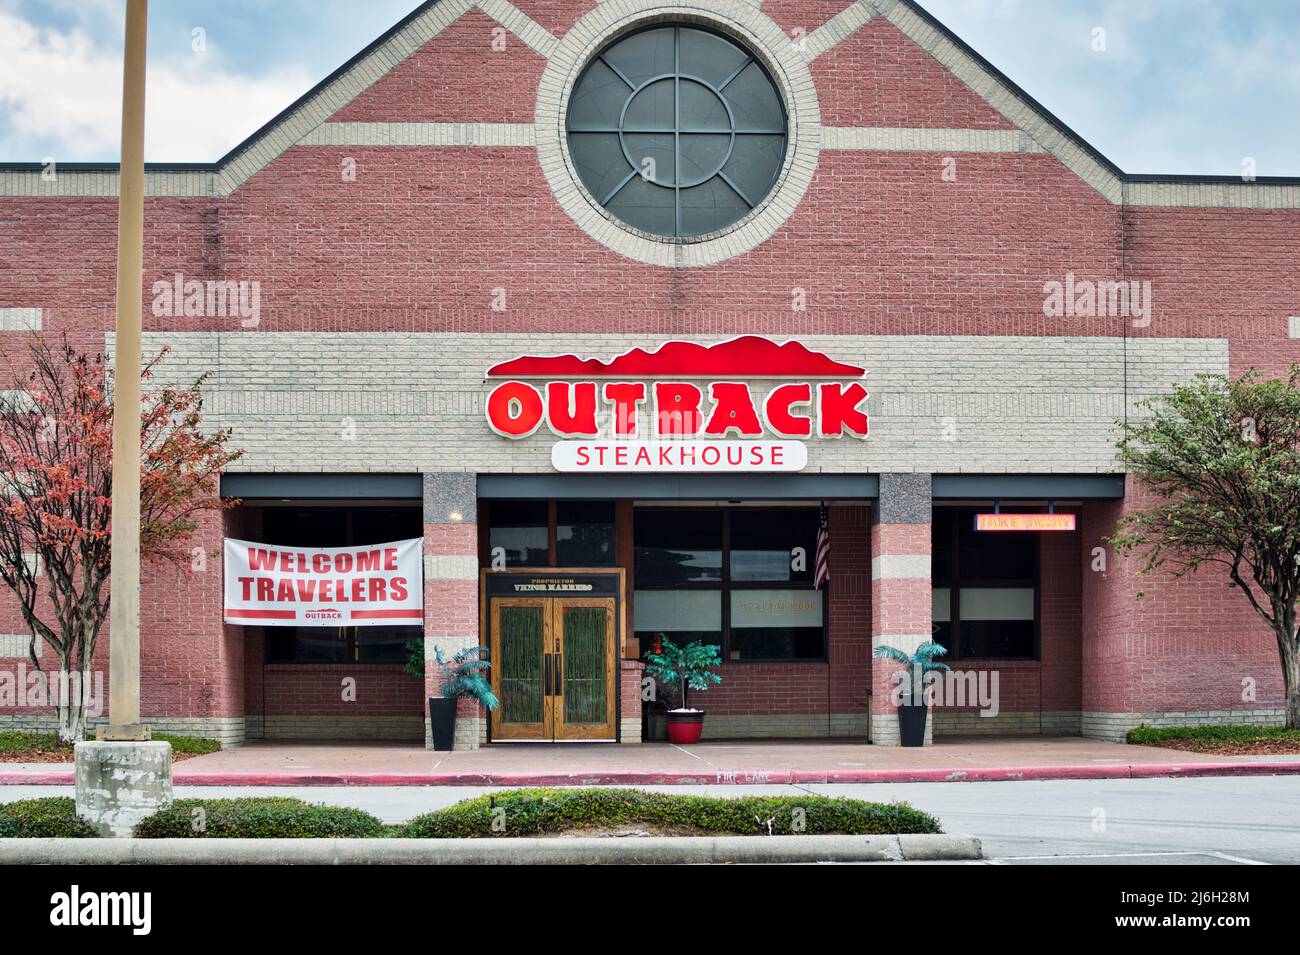 Houston, Texas USA 12-03-2021: Outback Steakhouse storefront and front entrance in Houston TX. Australian themed American restaurant founded in 1988. Stock Photo